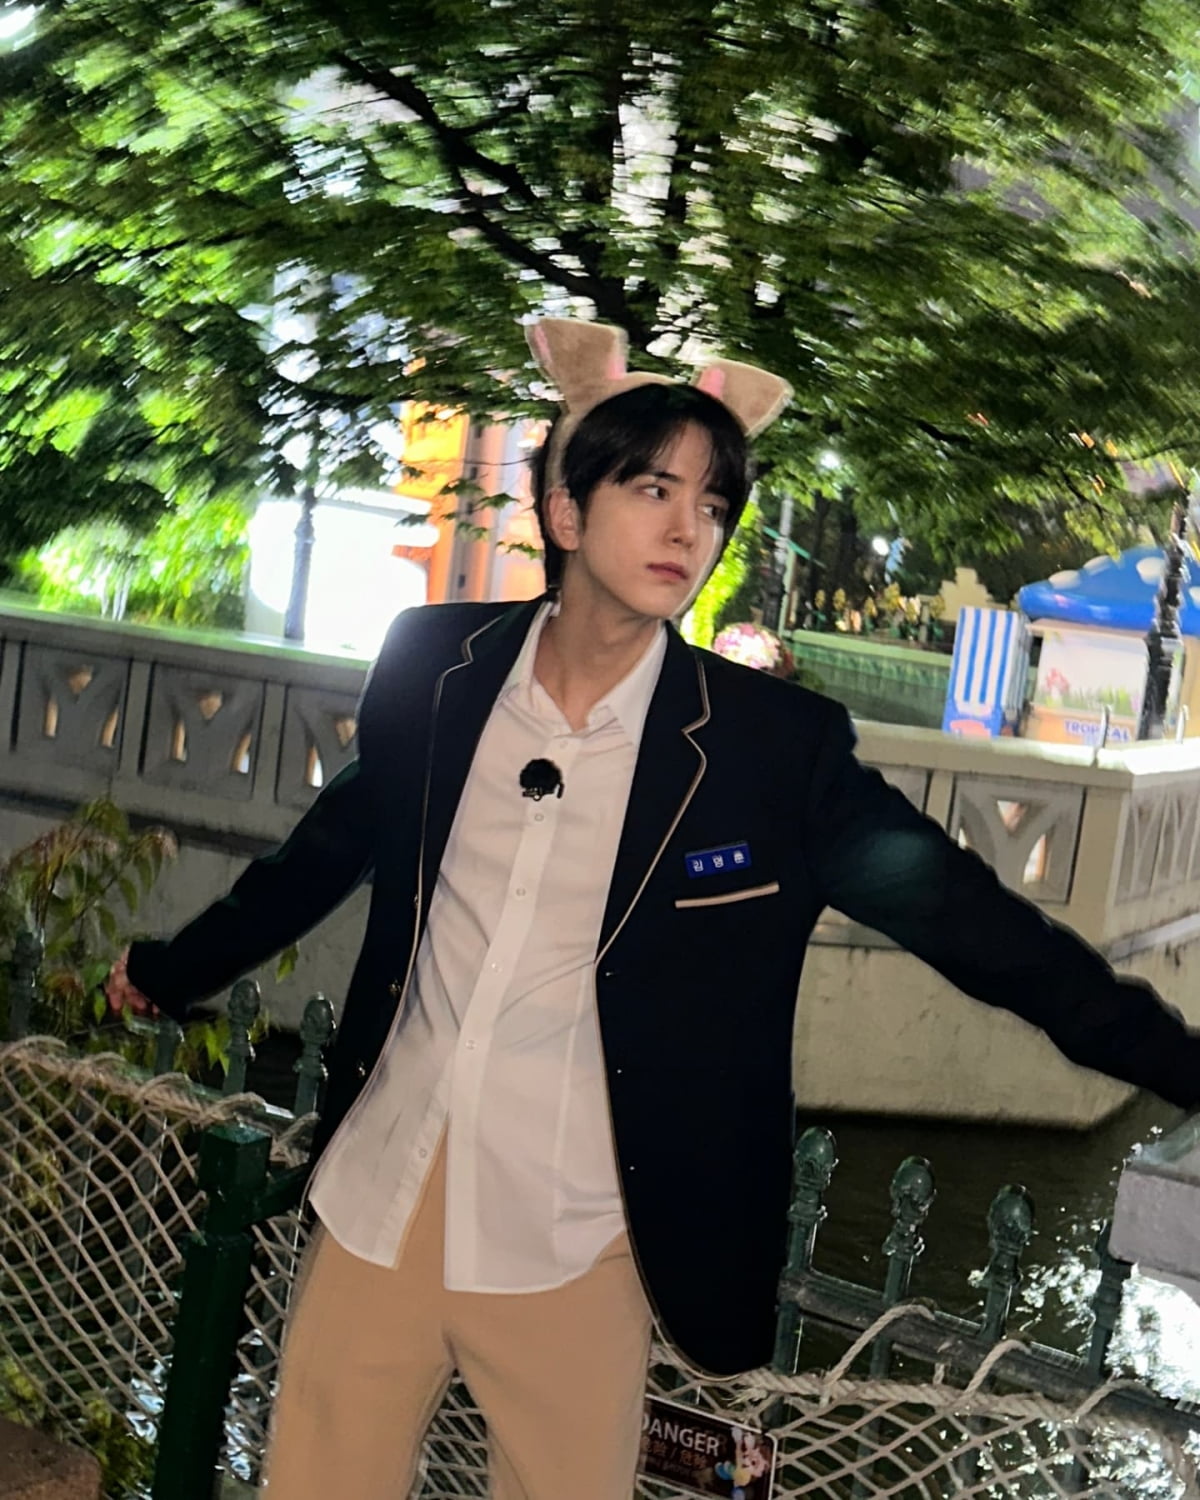 The Boyz Younghoon, a photo of himself wearing a school uniform without any discomfort